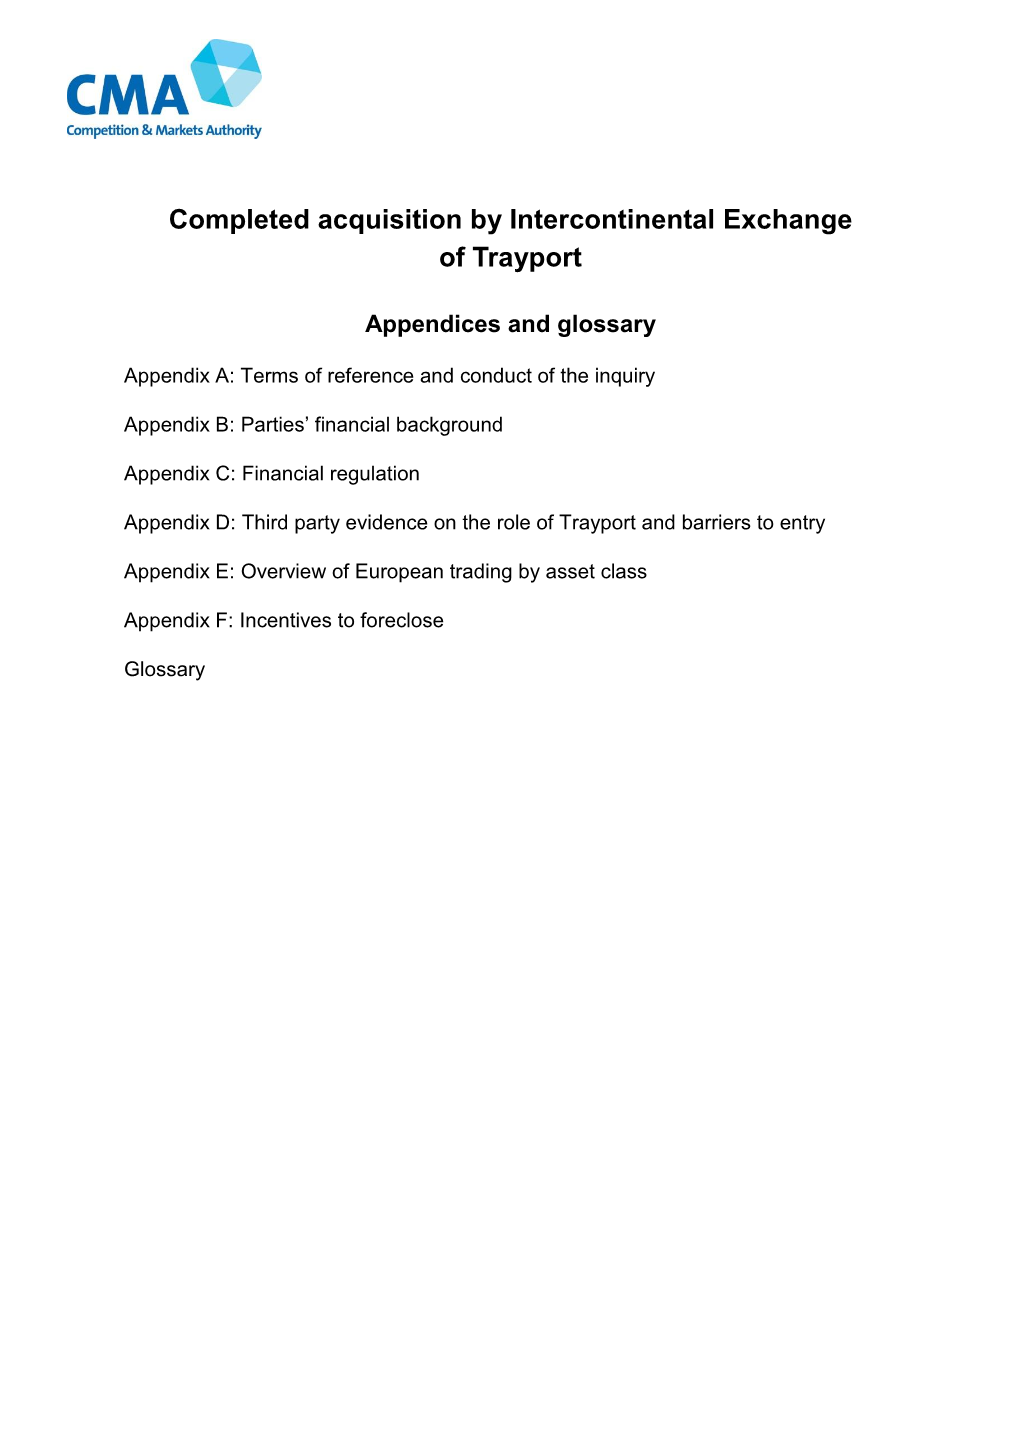 ICE/Trayport: Provisional Findings Appendices and Glossary